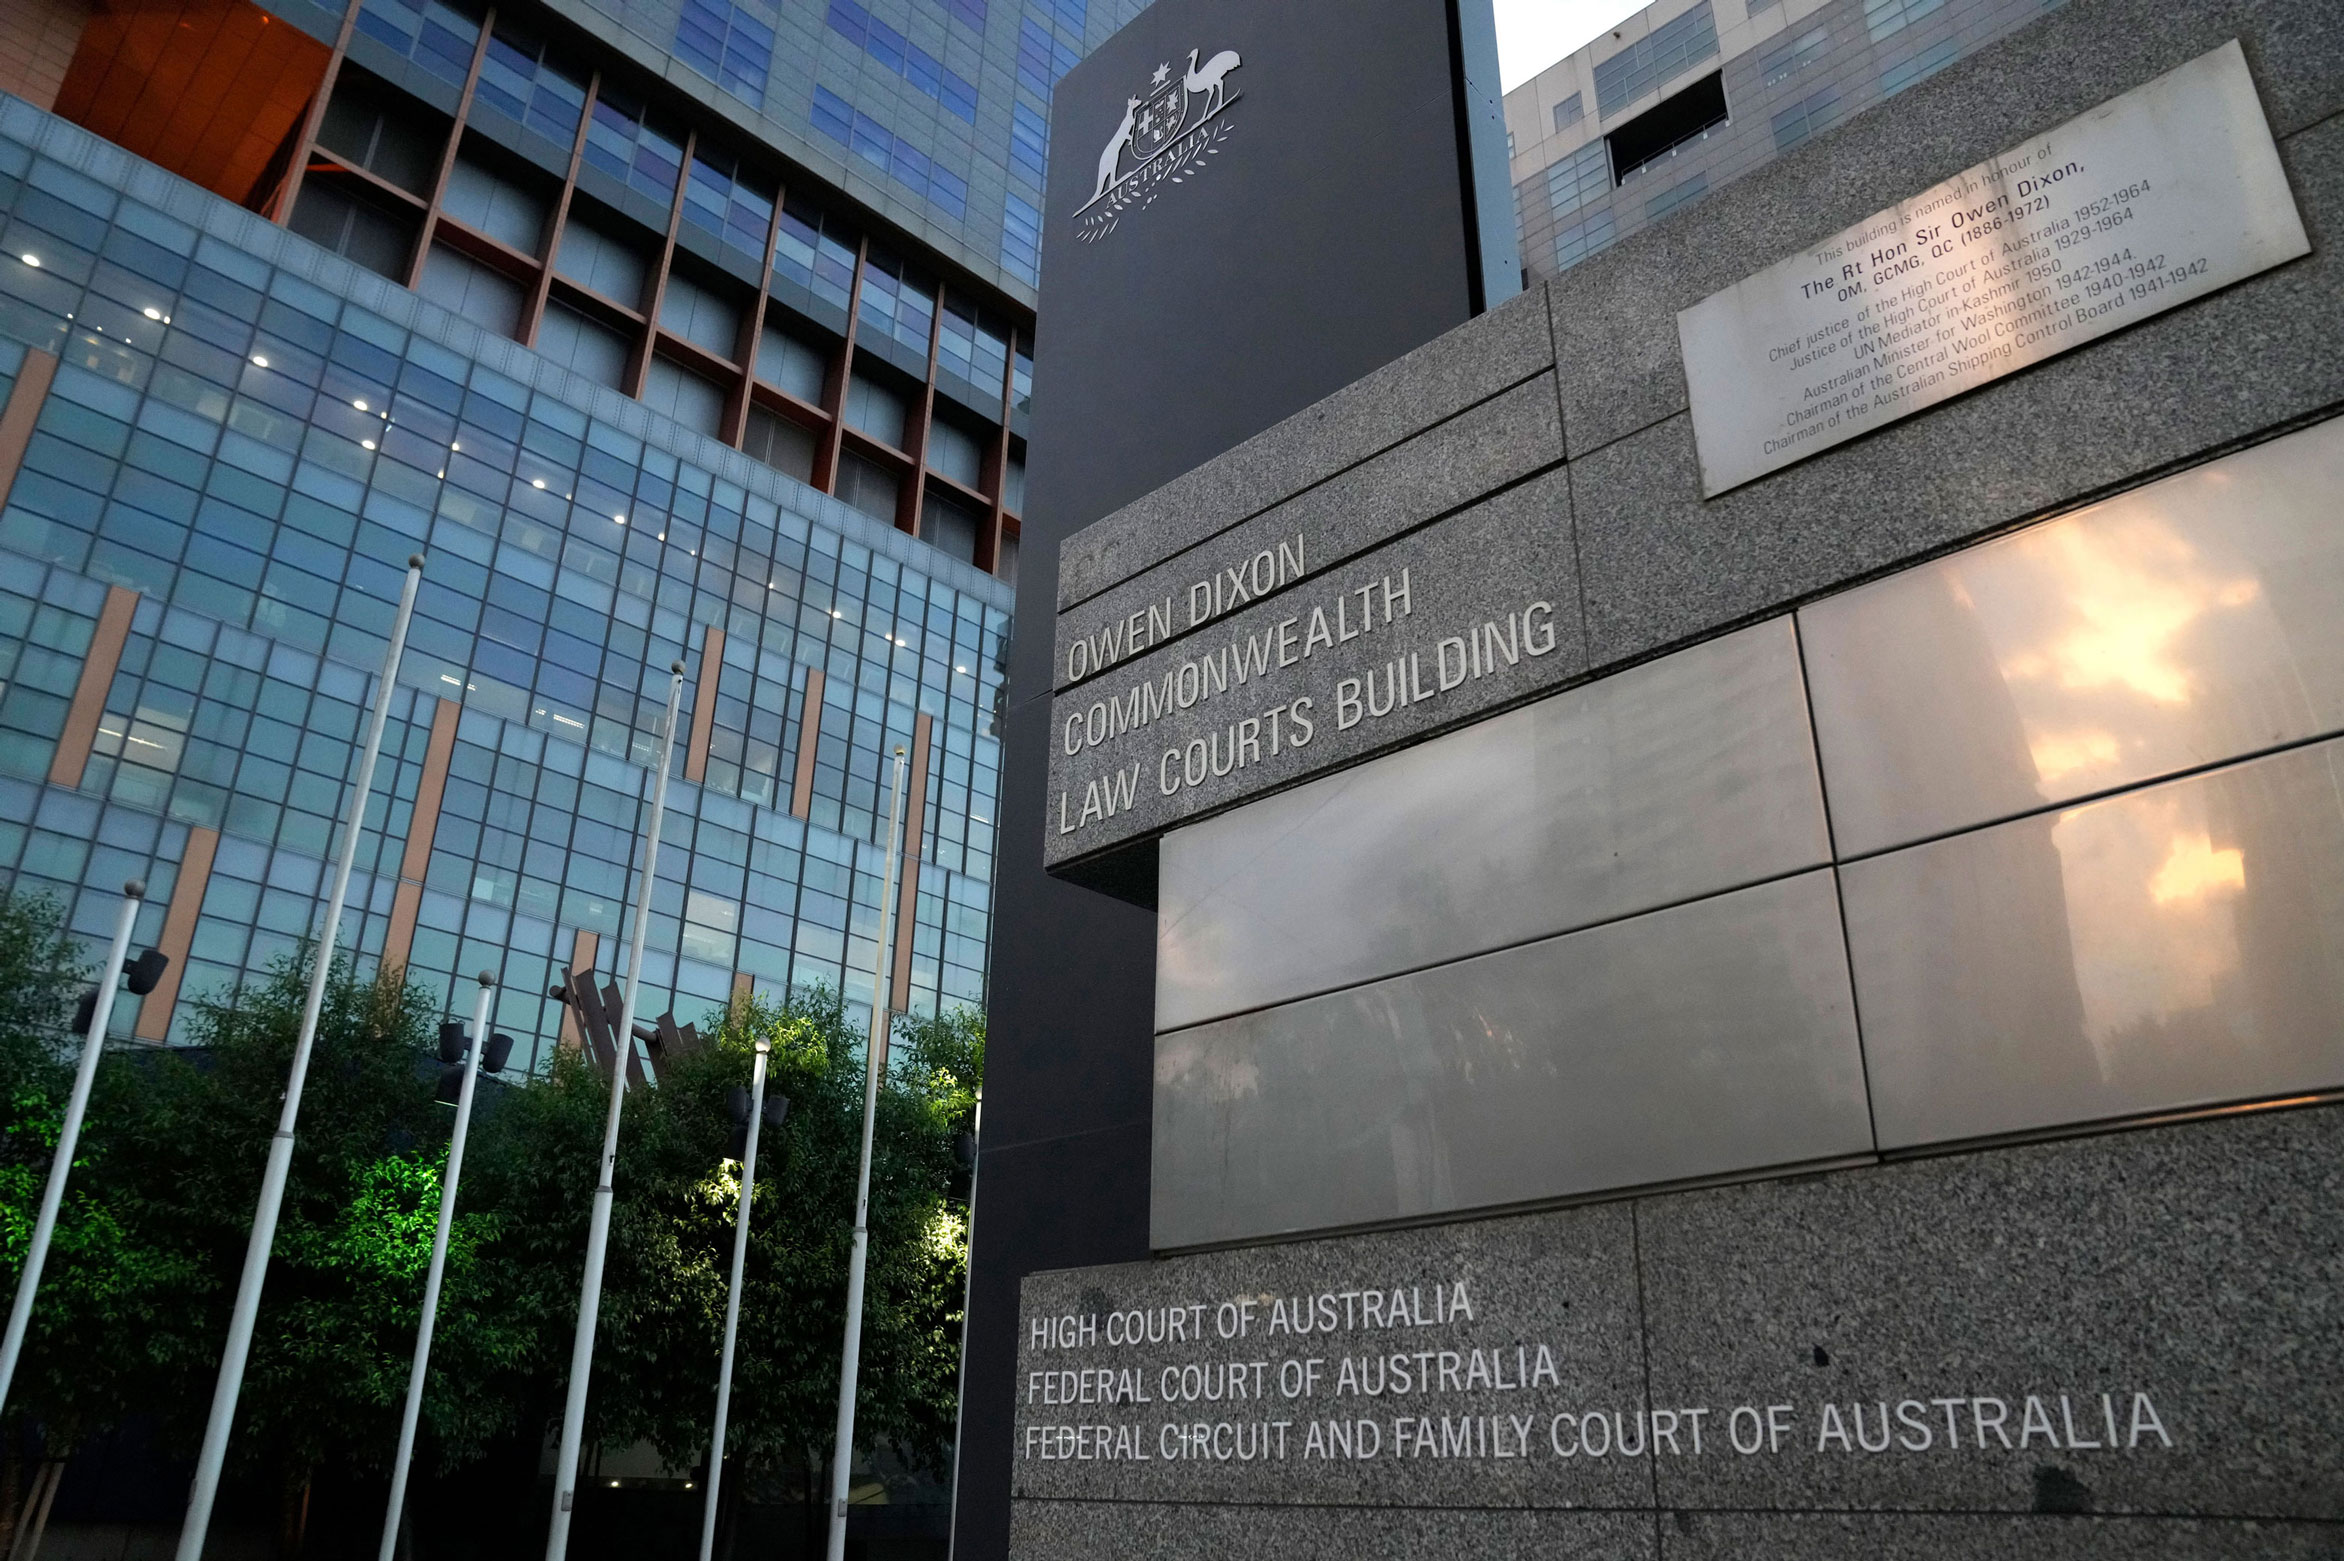 The Owen Dixon Commonwealth Law Courts building, where the hearing of Serbian tennis player Novak Djokovic is held at the Federal Circuit and Family Court of Australia, is seen in Melbourne, Australia, Friday, January 14.